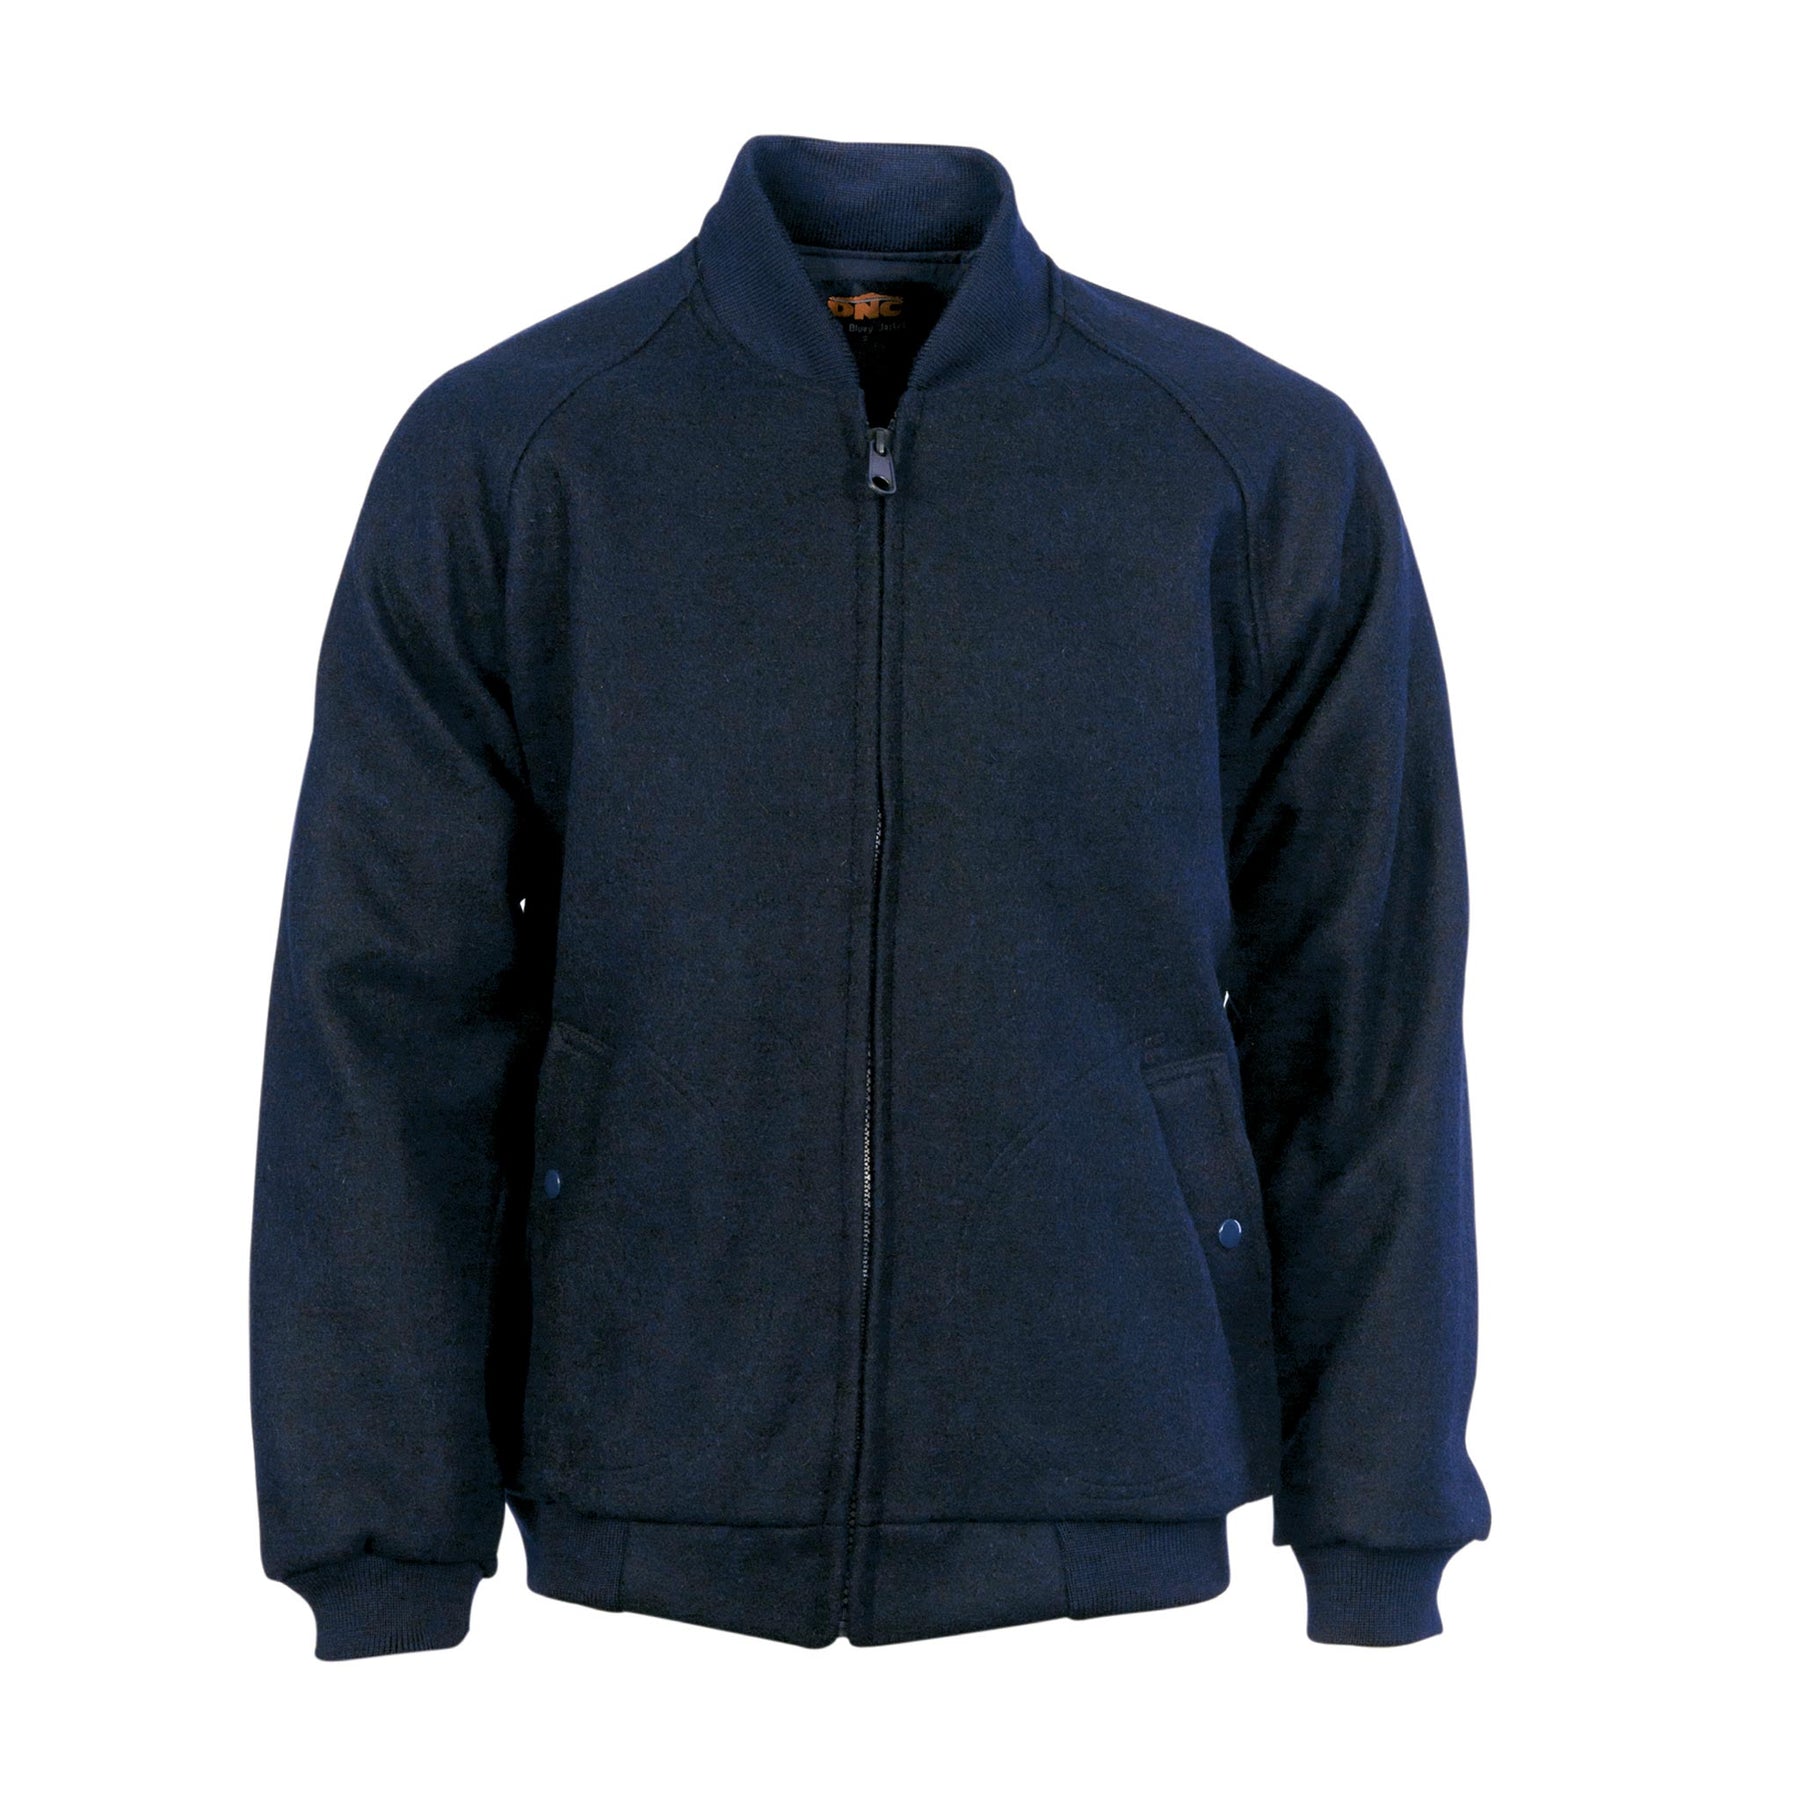 bluey jacket with ribbing collar and cuffs in navy